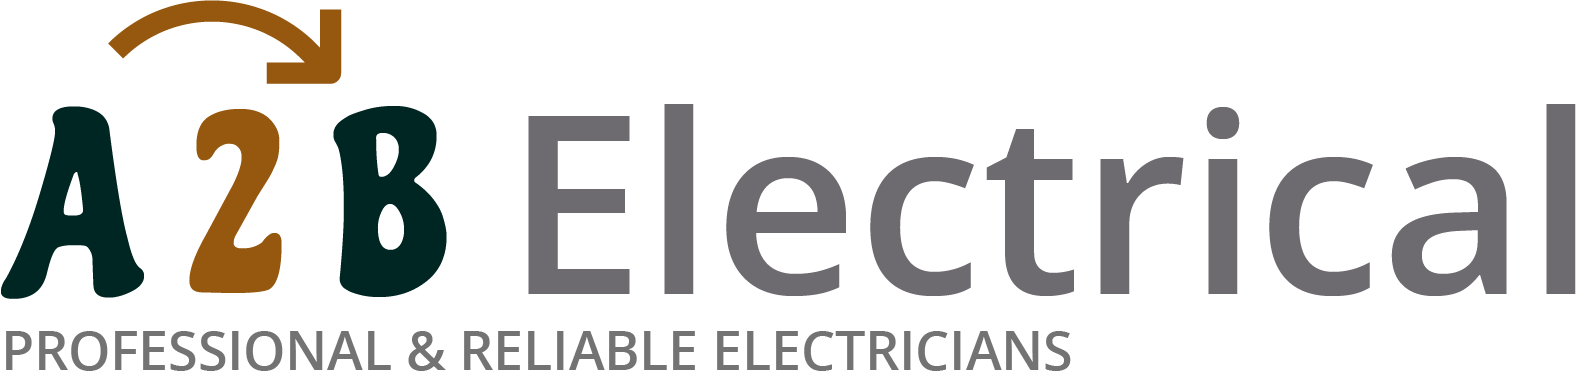 If you have electrical wiring problems in Ashington, we can provide an electrician to have a look for you. 